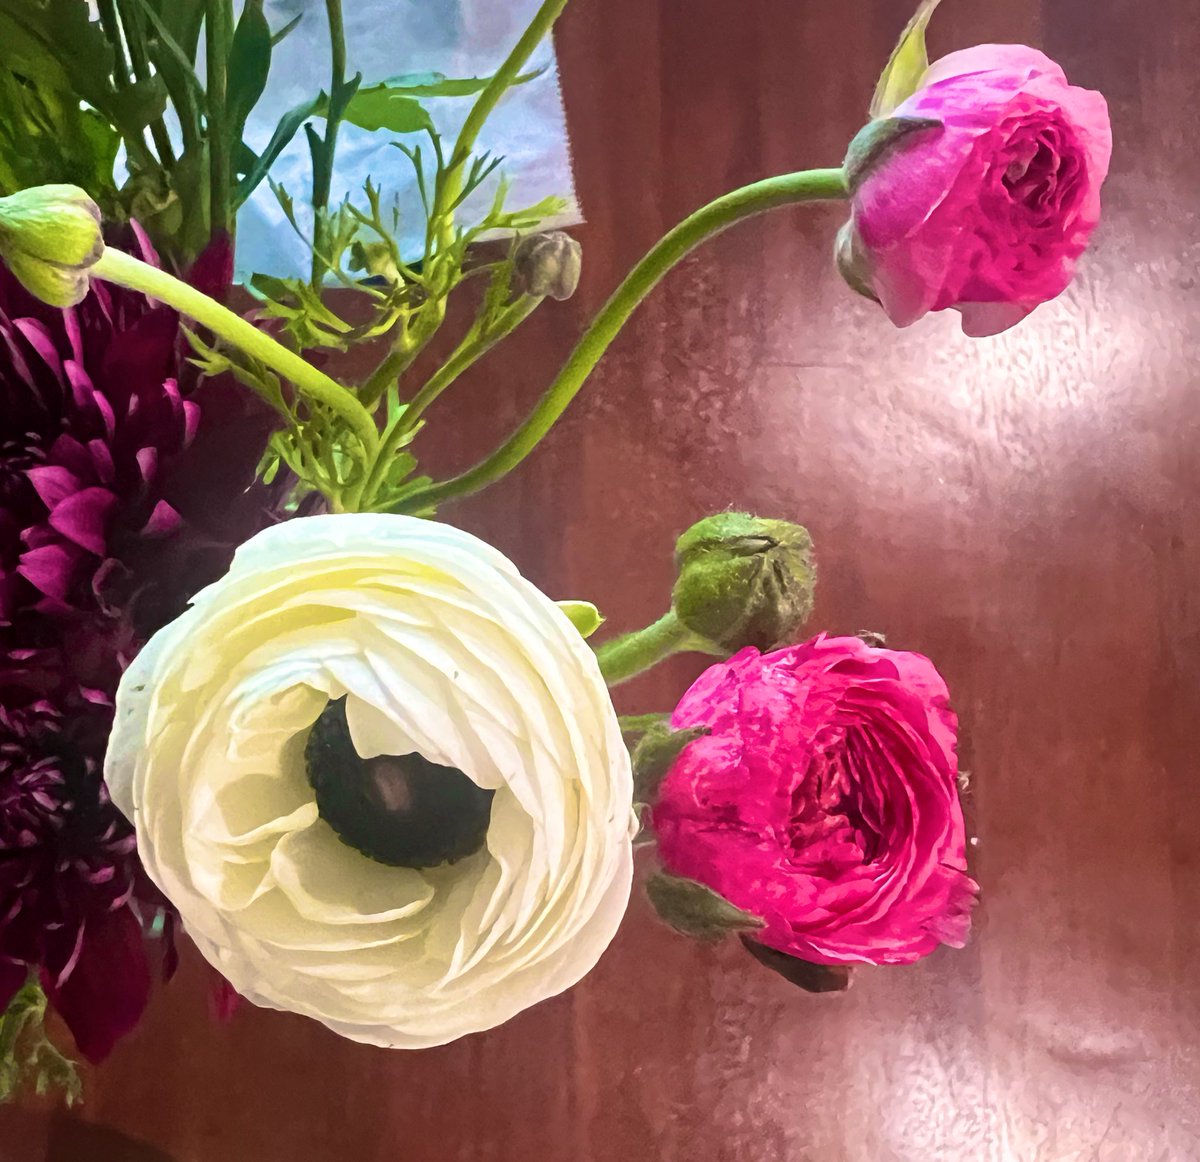 It’s ranunculus how beautiful these are.